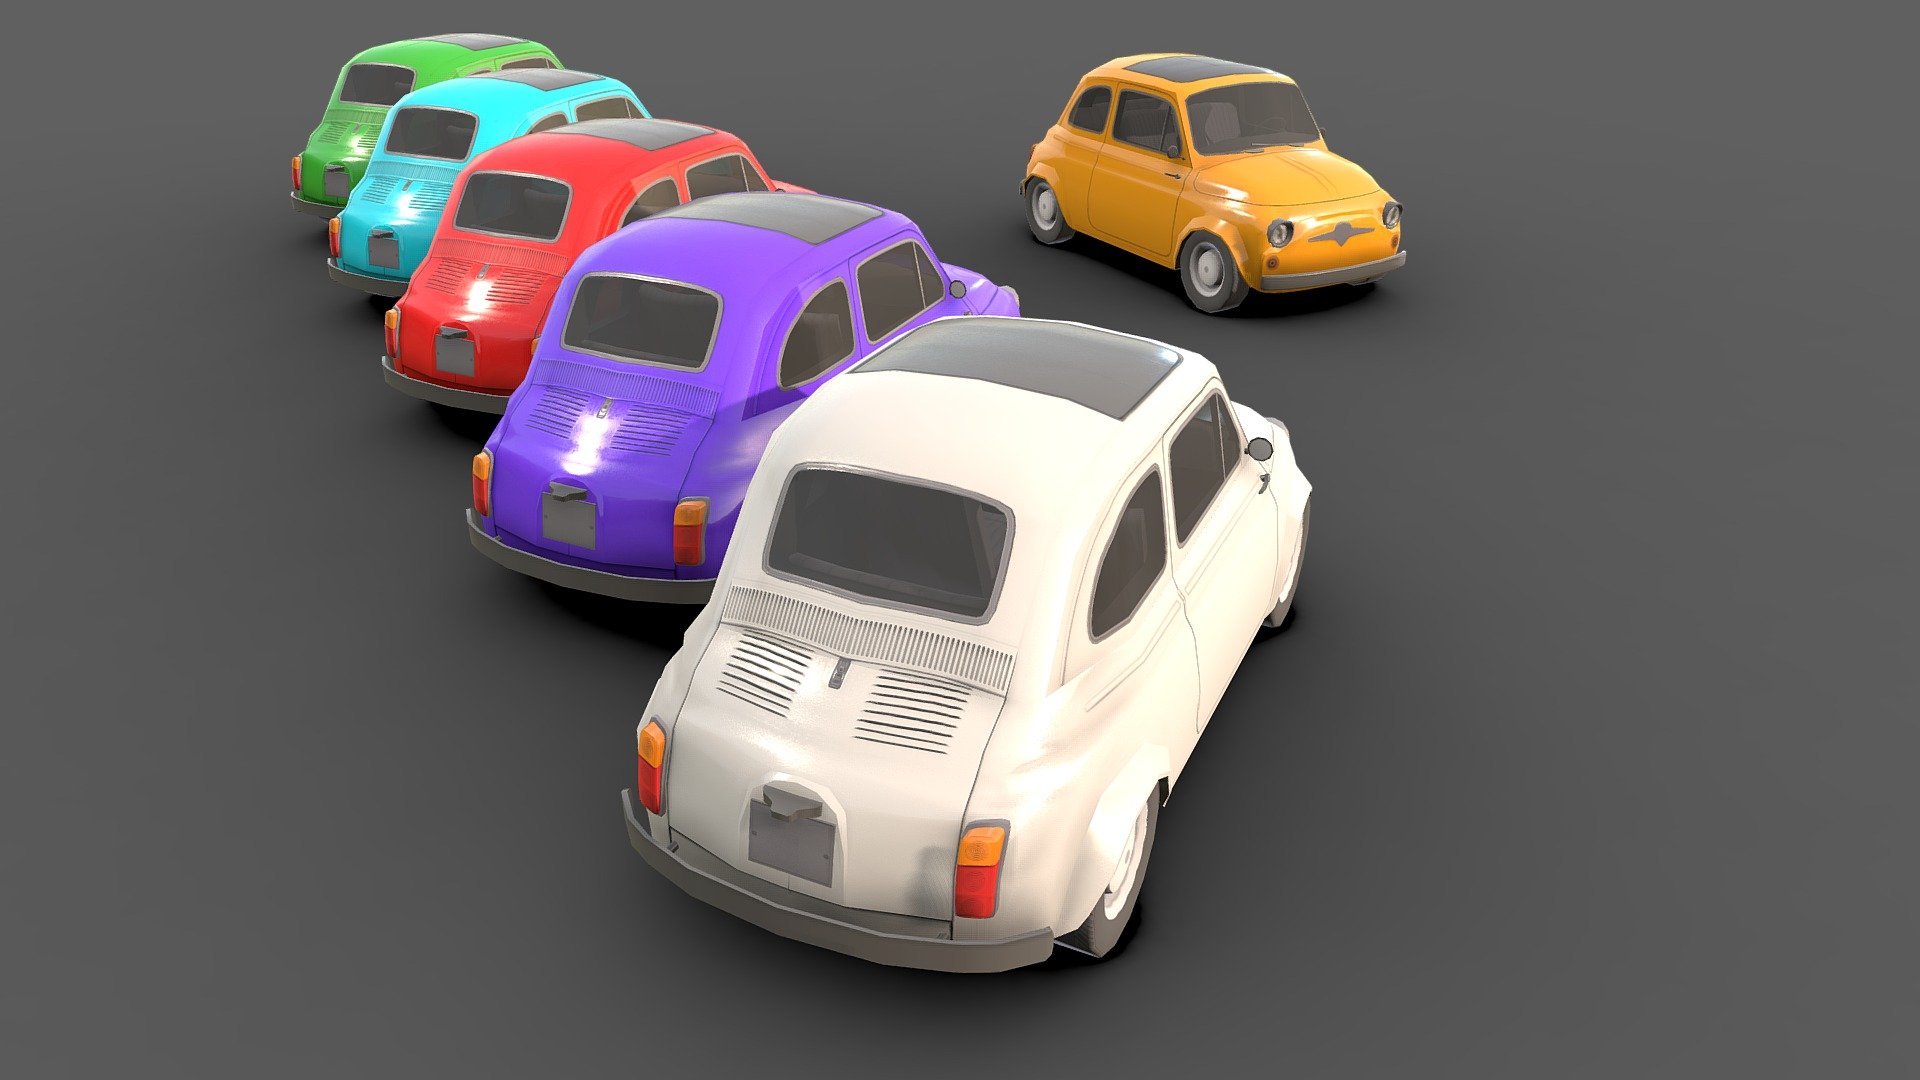 Classic Car # 8 .

You can use these models in any game and project.

This model is made with order and precision.

Separated parts (bodys . wheels . Steer ).

This car has 6 different colors.

Very Low- Poly.

The interior of this car is very low poly.

Average poly count: 5,000 tris.

Texture size: 2048 / 1024 / 512 (PNG).

It has a UV map texture.

Number of textures: 3.

Number of materials: 4.

Format: Fbx / Obj / 3DMax .

The original files are in the Additional file .

Wait for my new models.. Your friend (Sidra) 3d model